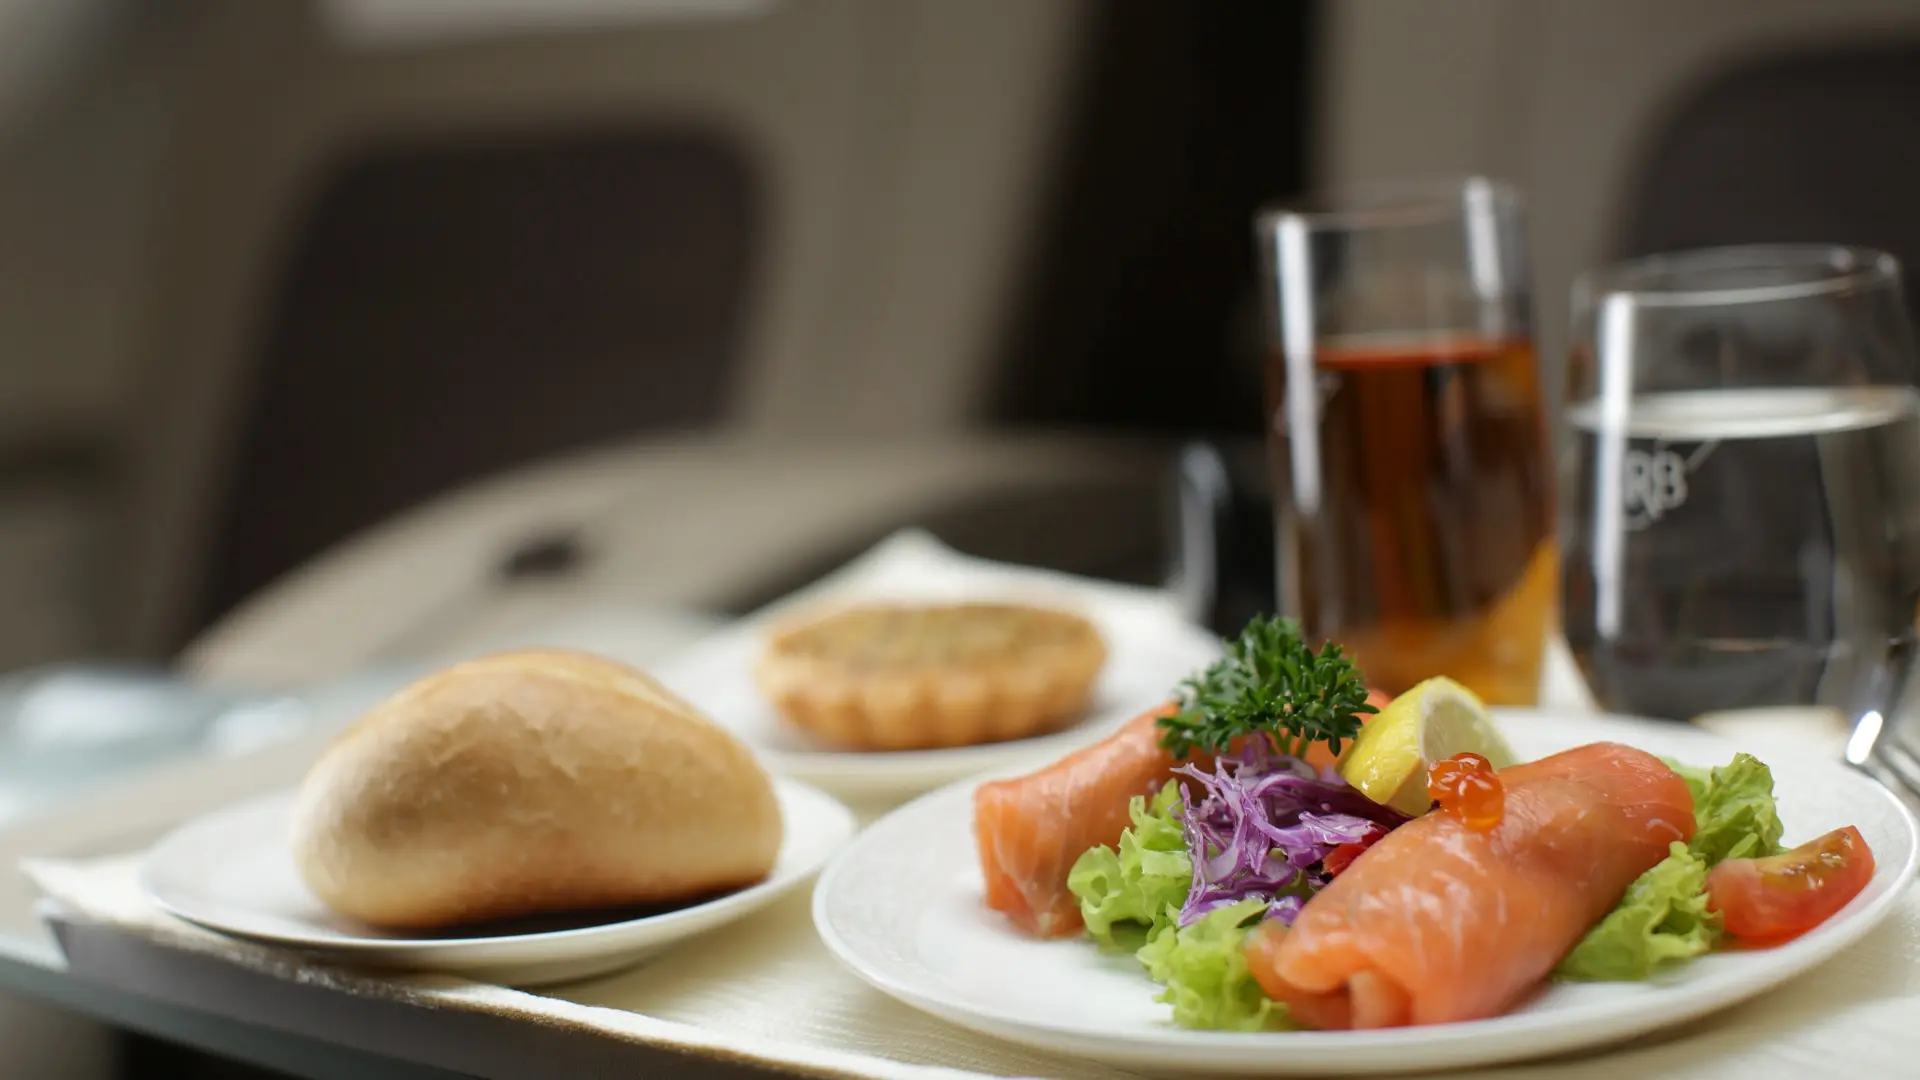 Royal Brunei Airlines Business Class food